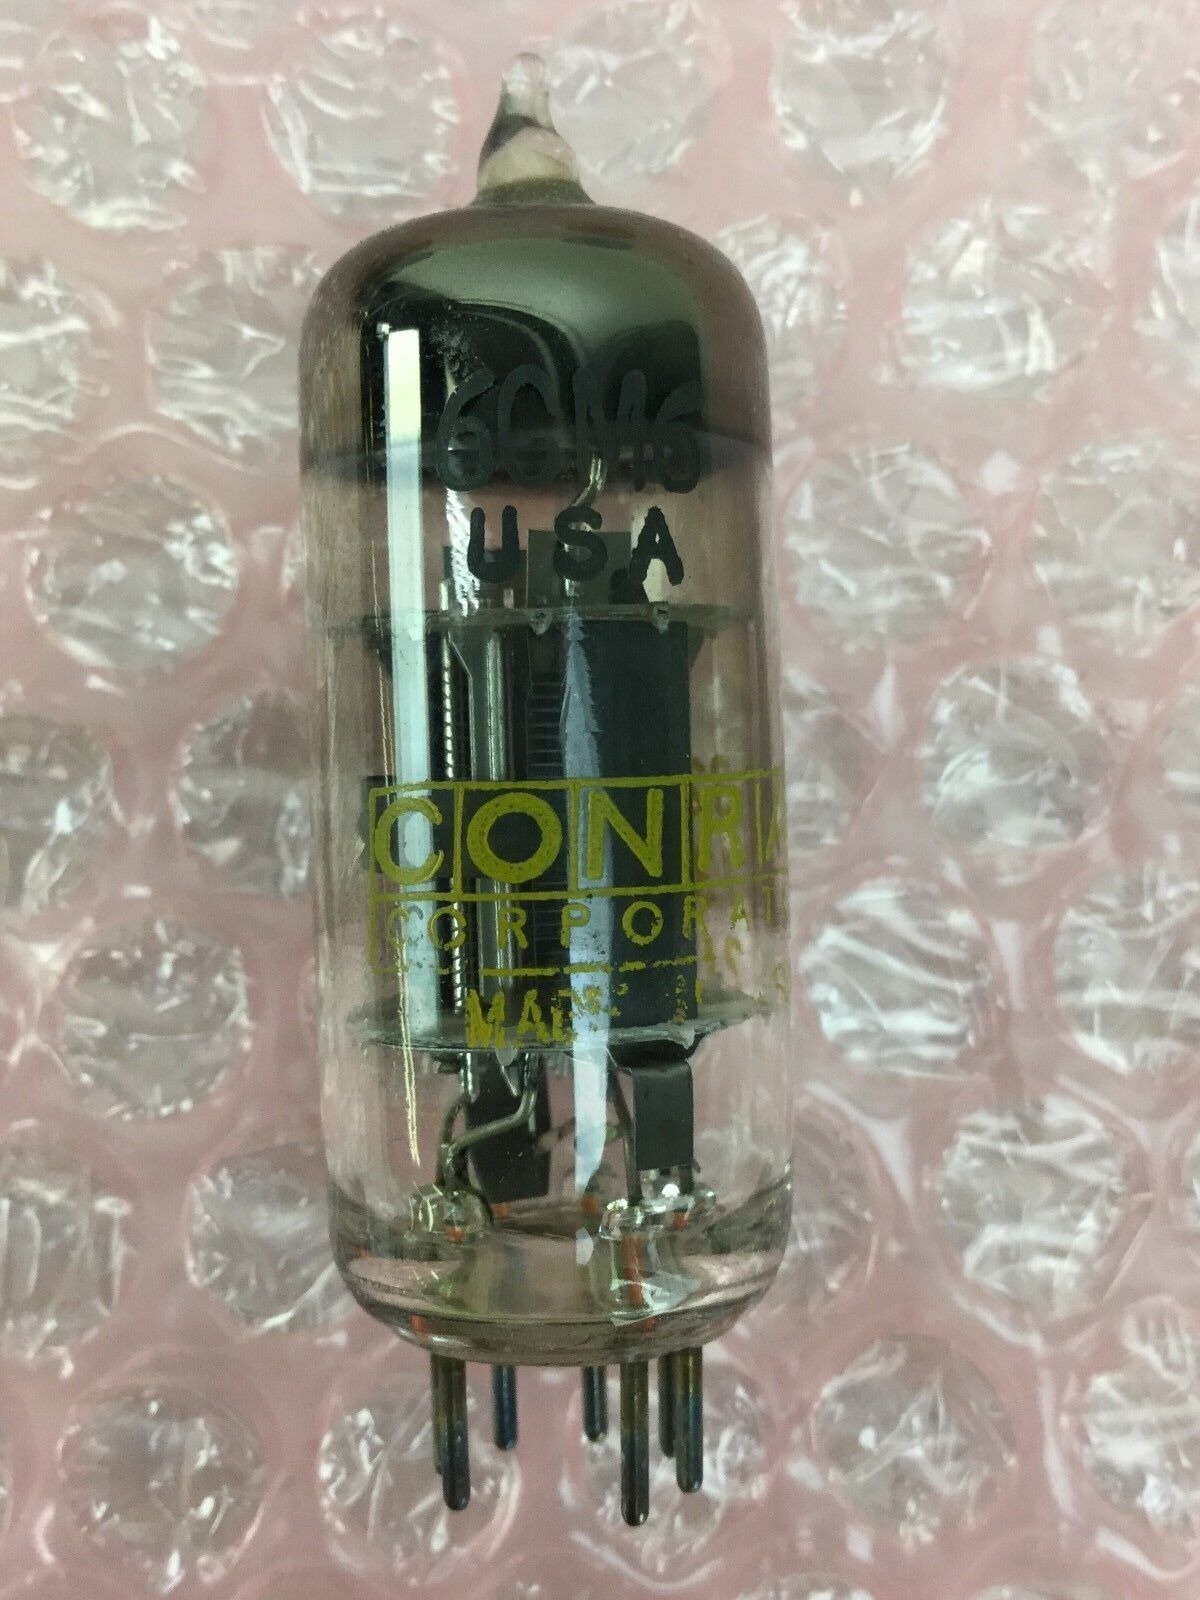 CONRAC 6GM6 Tube, Tested and GOOD, Lot of 5